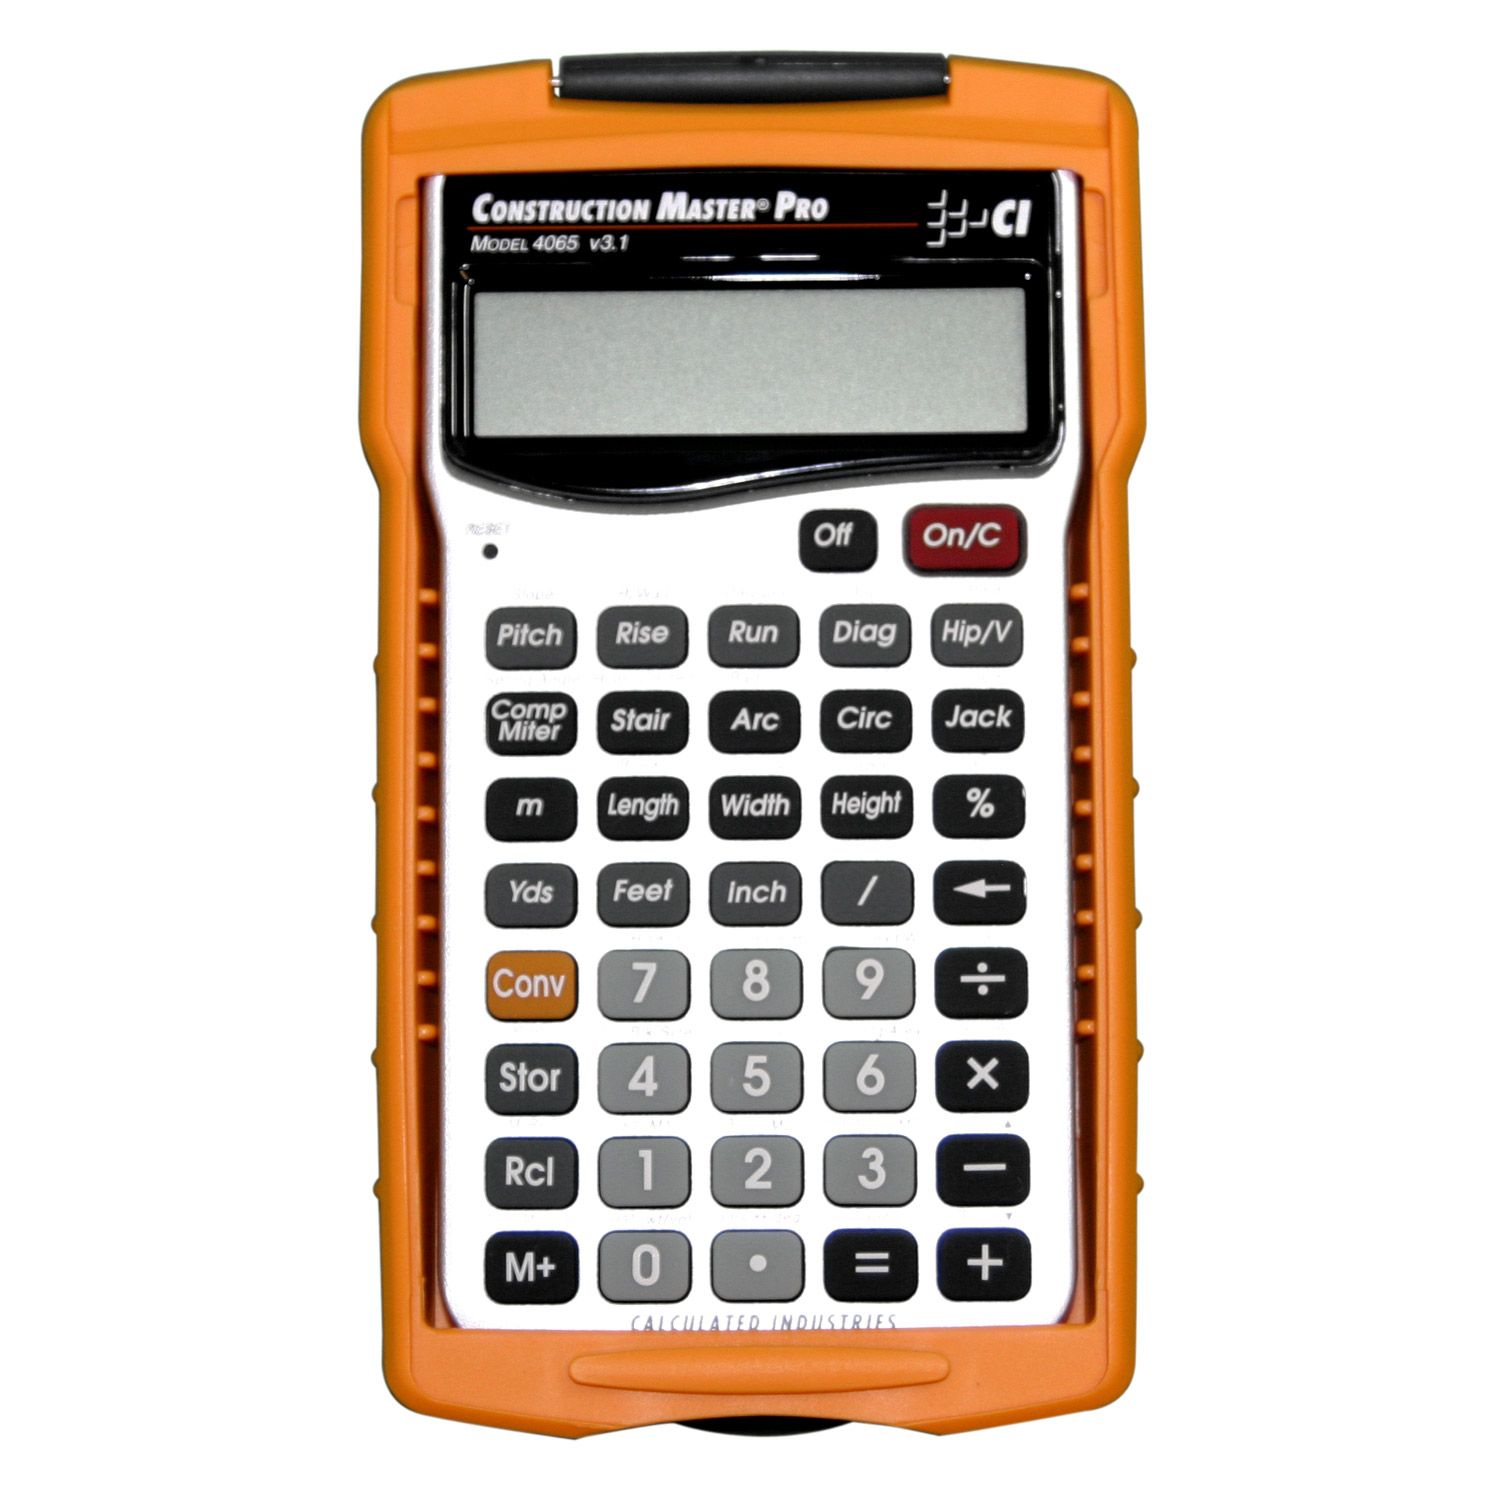 Calculated 4065 AG Construction Master Pro Calculator 098584040659 